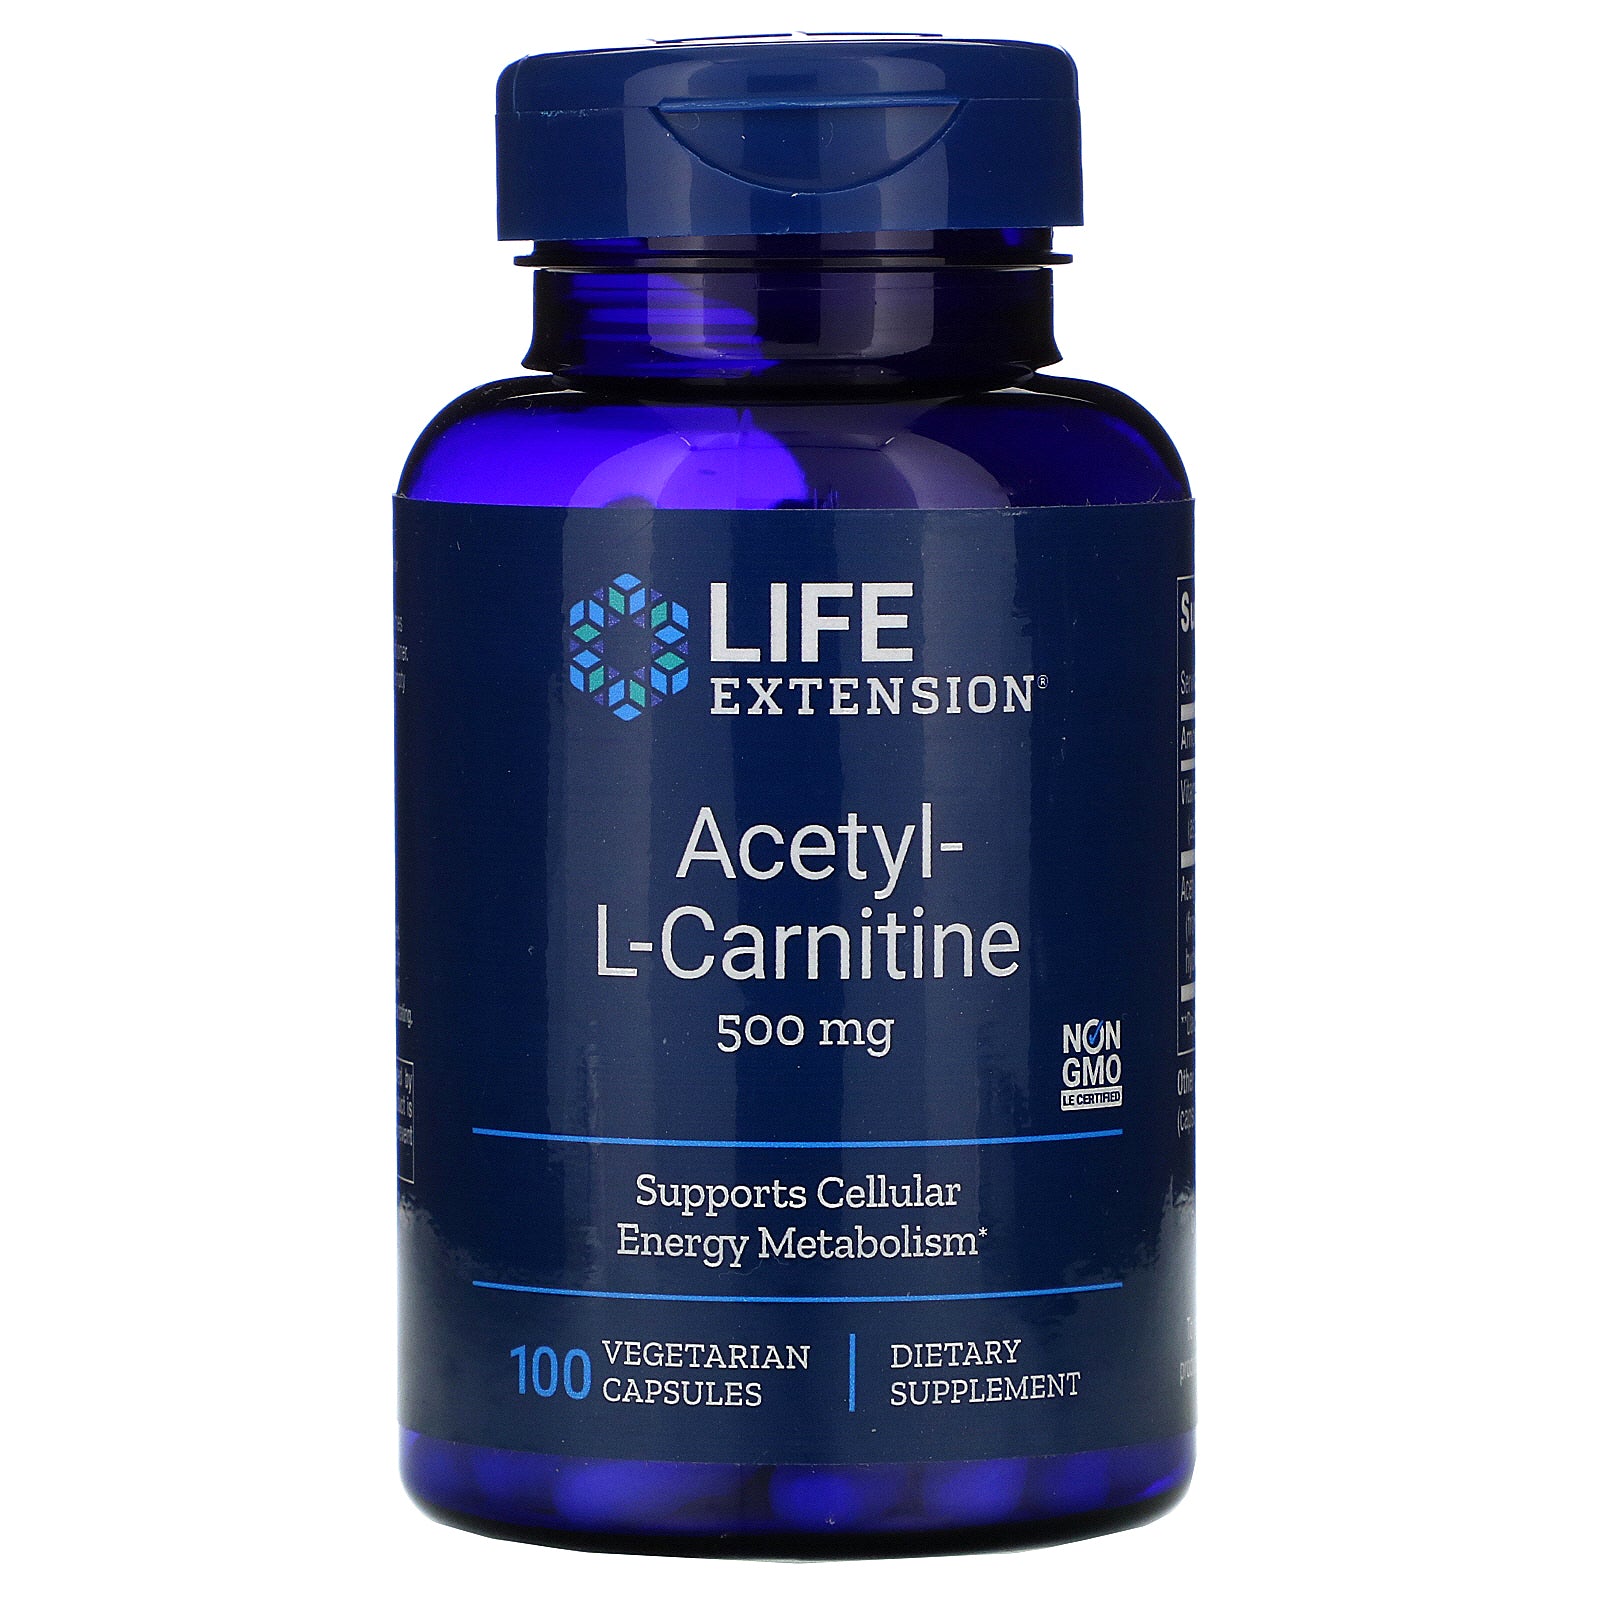 Life Extension, Acetyl-L-Carnitine, 500 mg, 100 Vegetarian Capsules